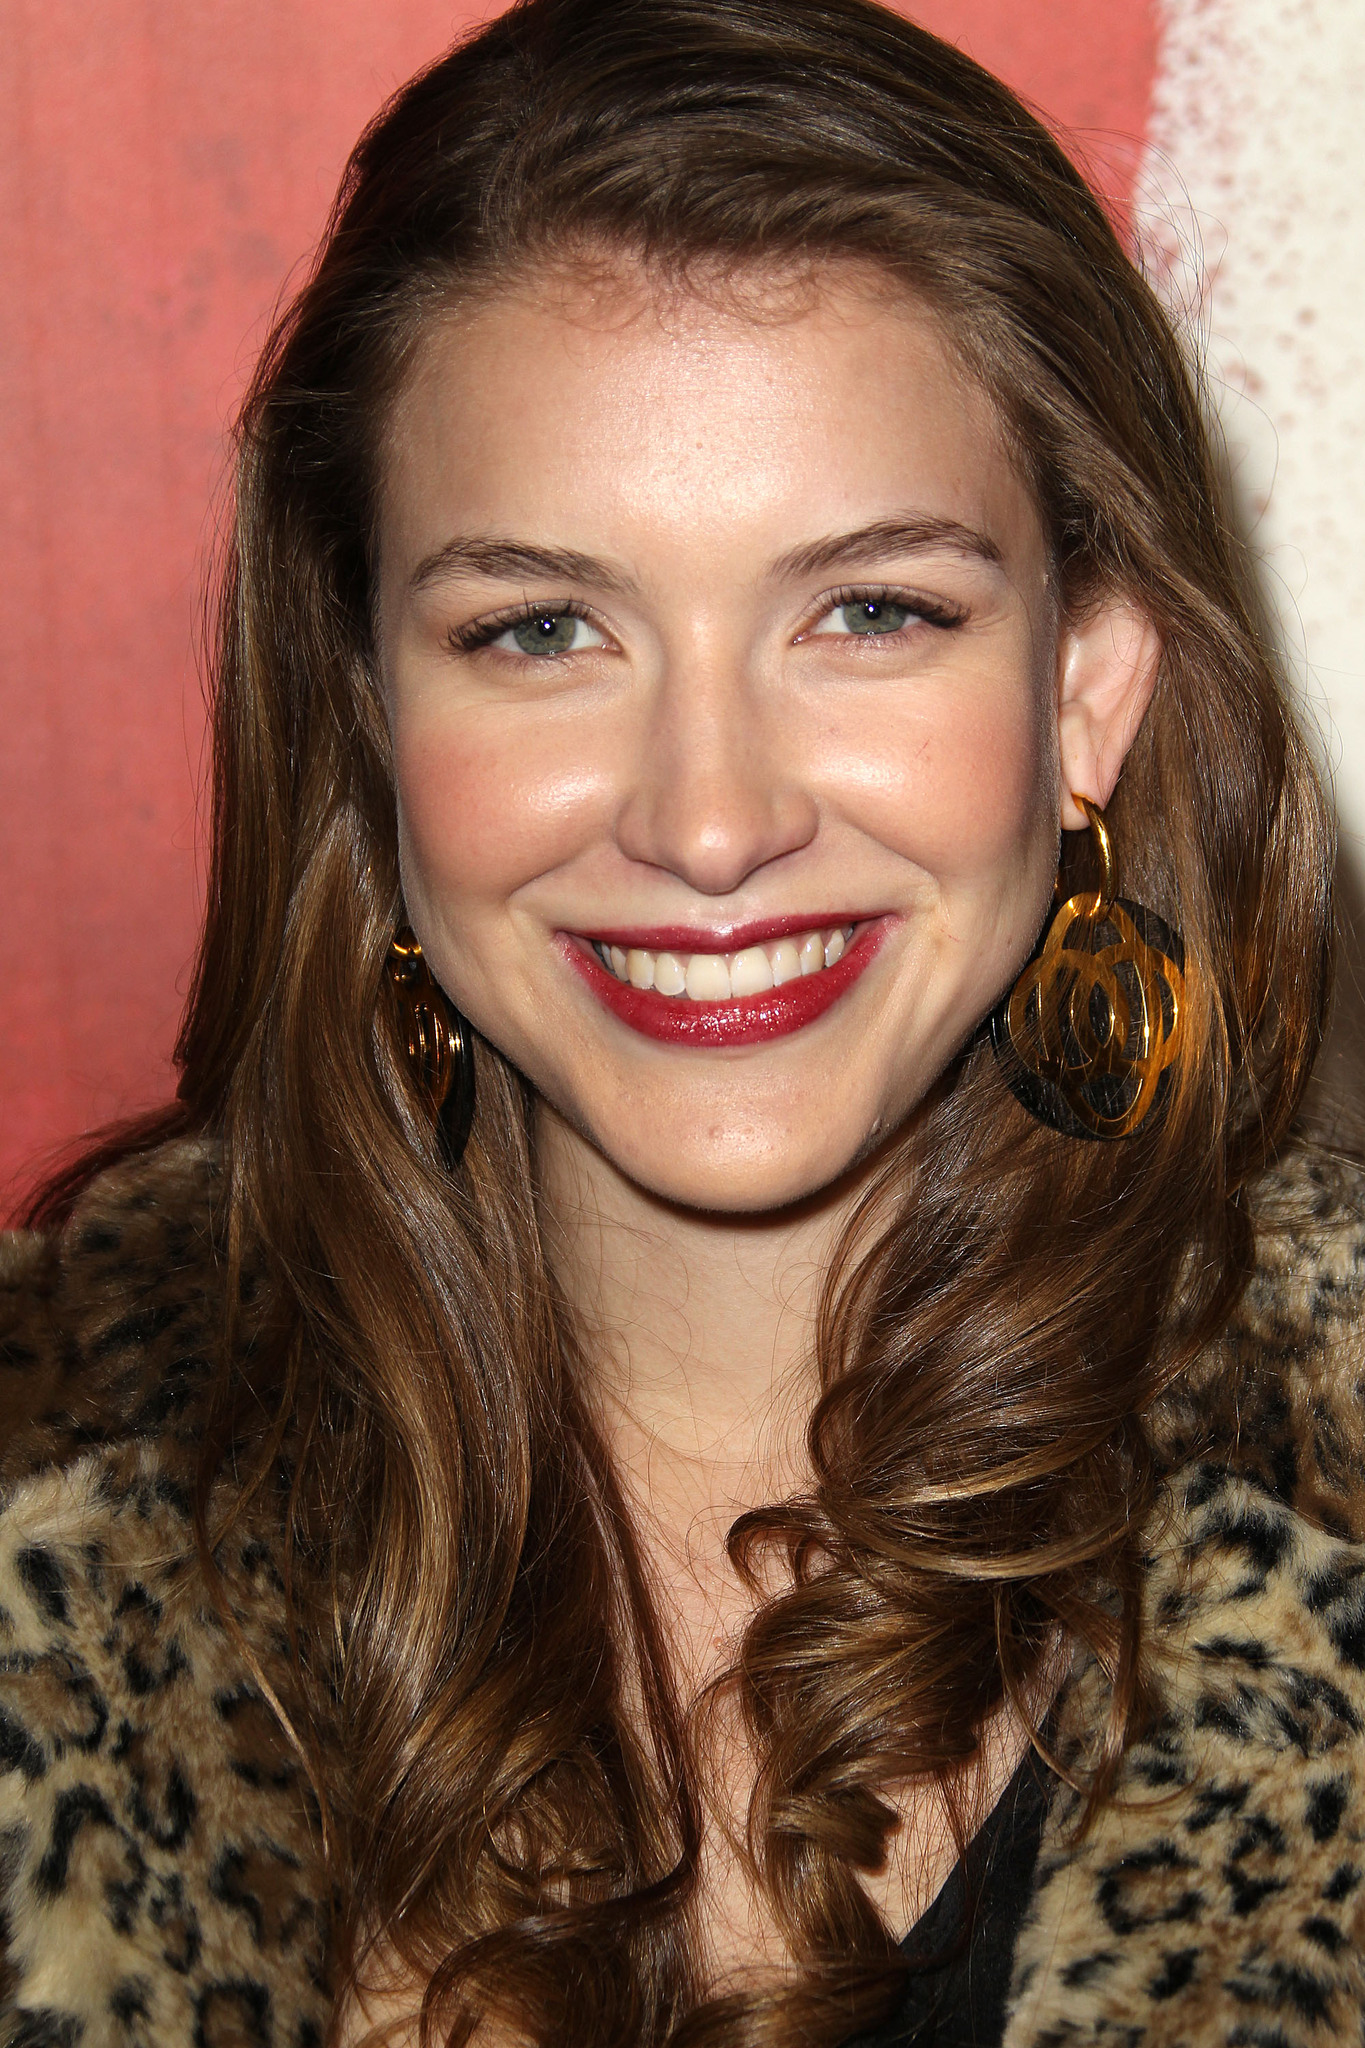 Nathalia Ramos at event of Waiting for Forever (2010)